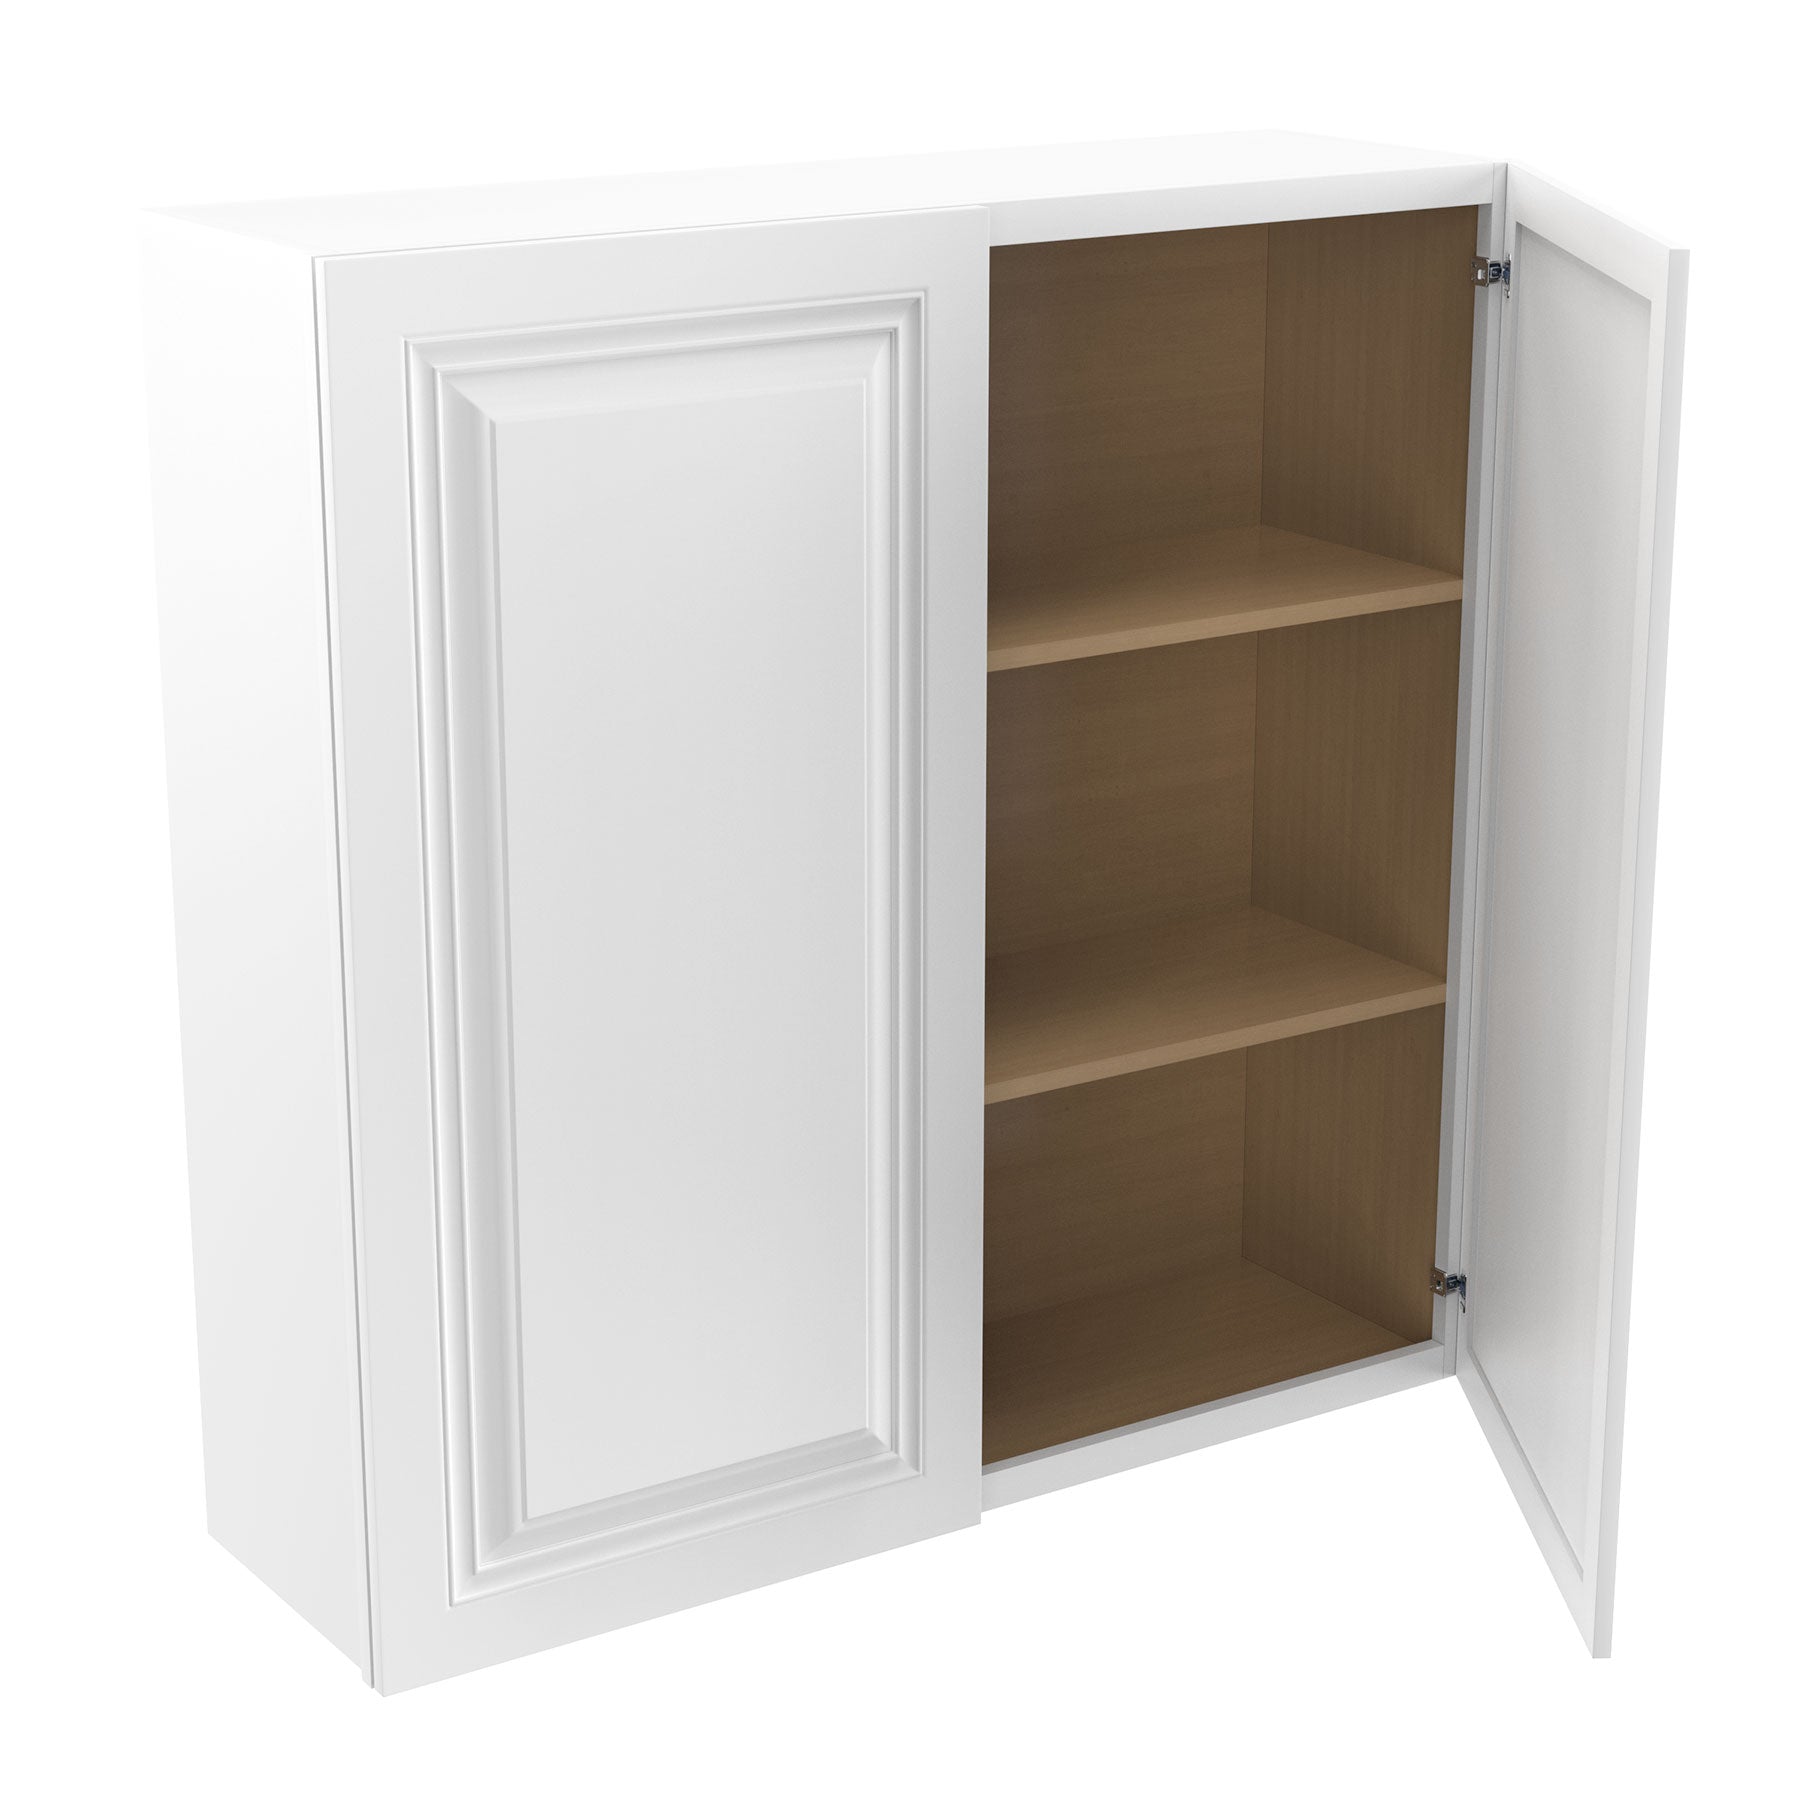 RTA - Park Avenue White - 42" High Double Door Wall Cabinet | 42"W x 42"H x 12"D